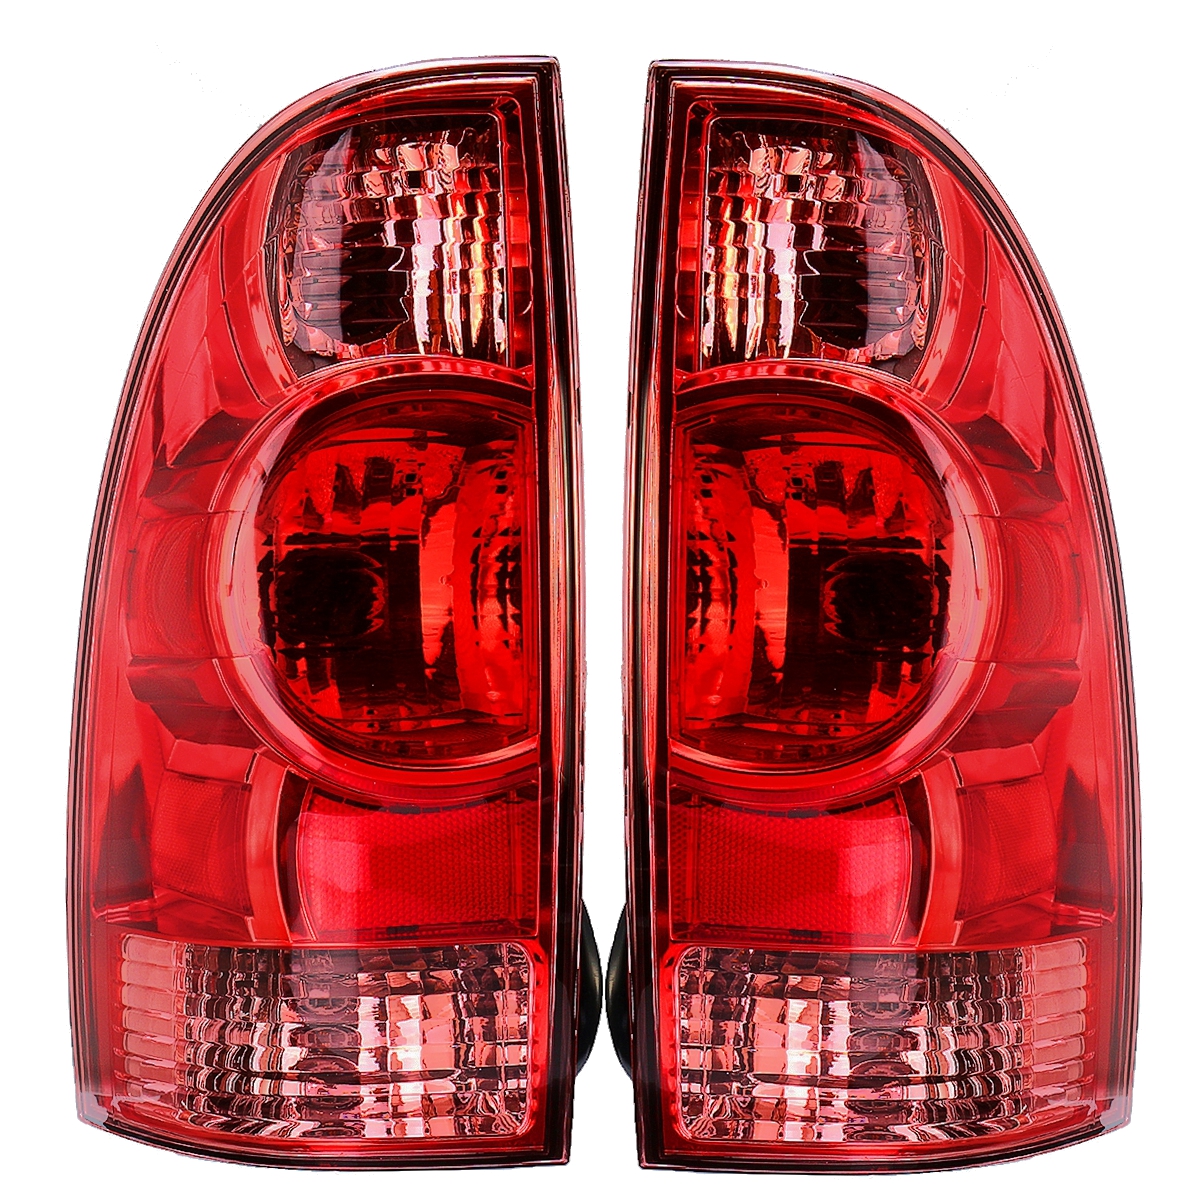 

Car Rear Tail Light Assembly Brake Lamp with No Bulb Left/Right for Toyota Tacoma Pickup 2005-2015